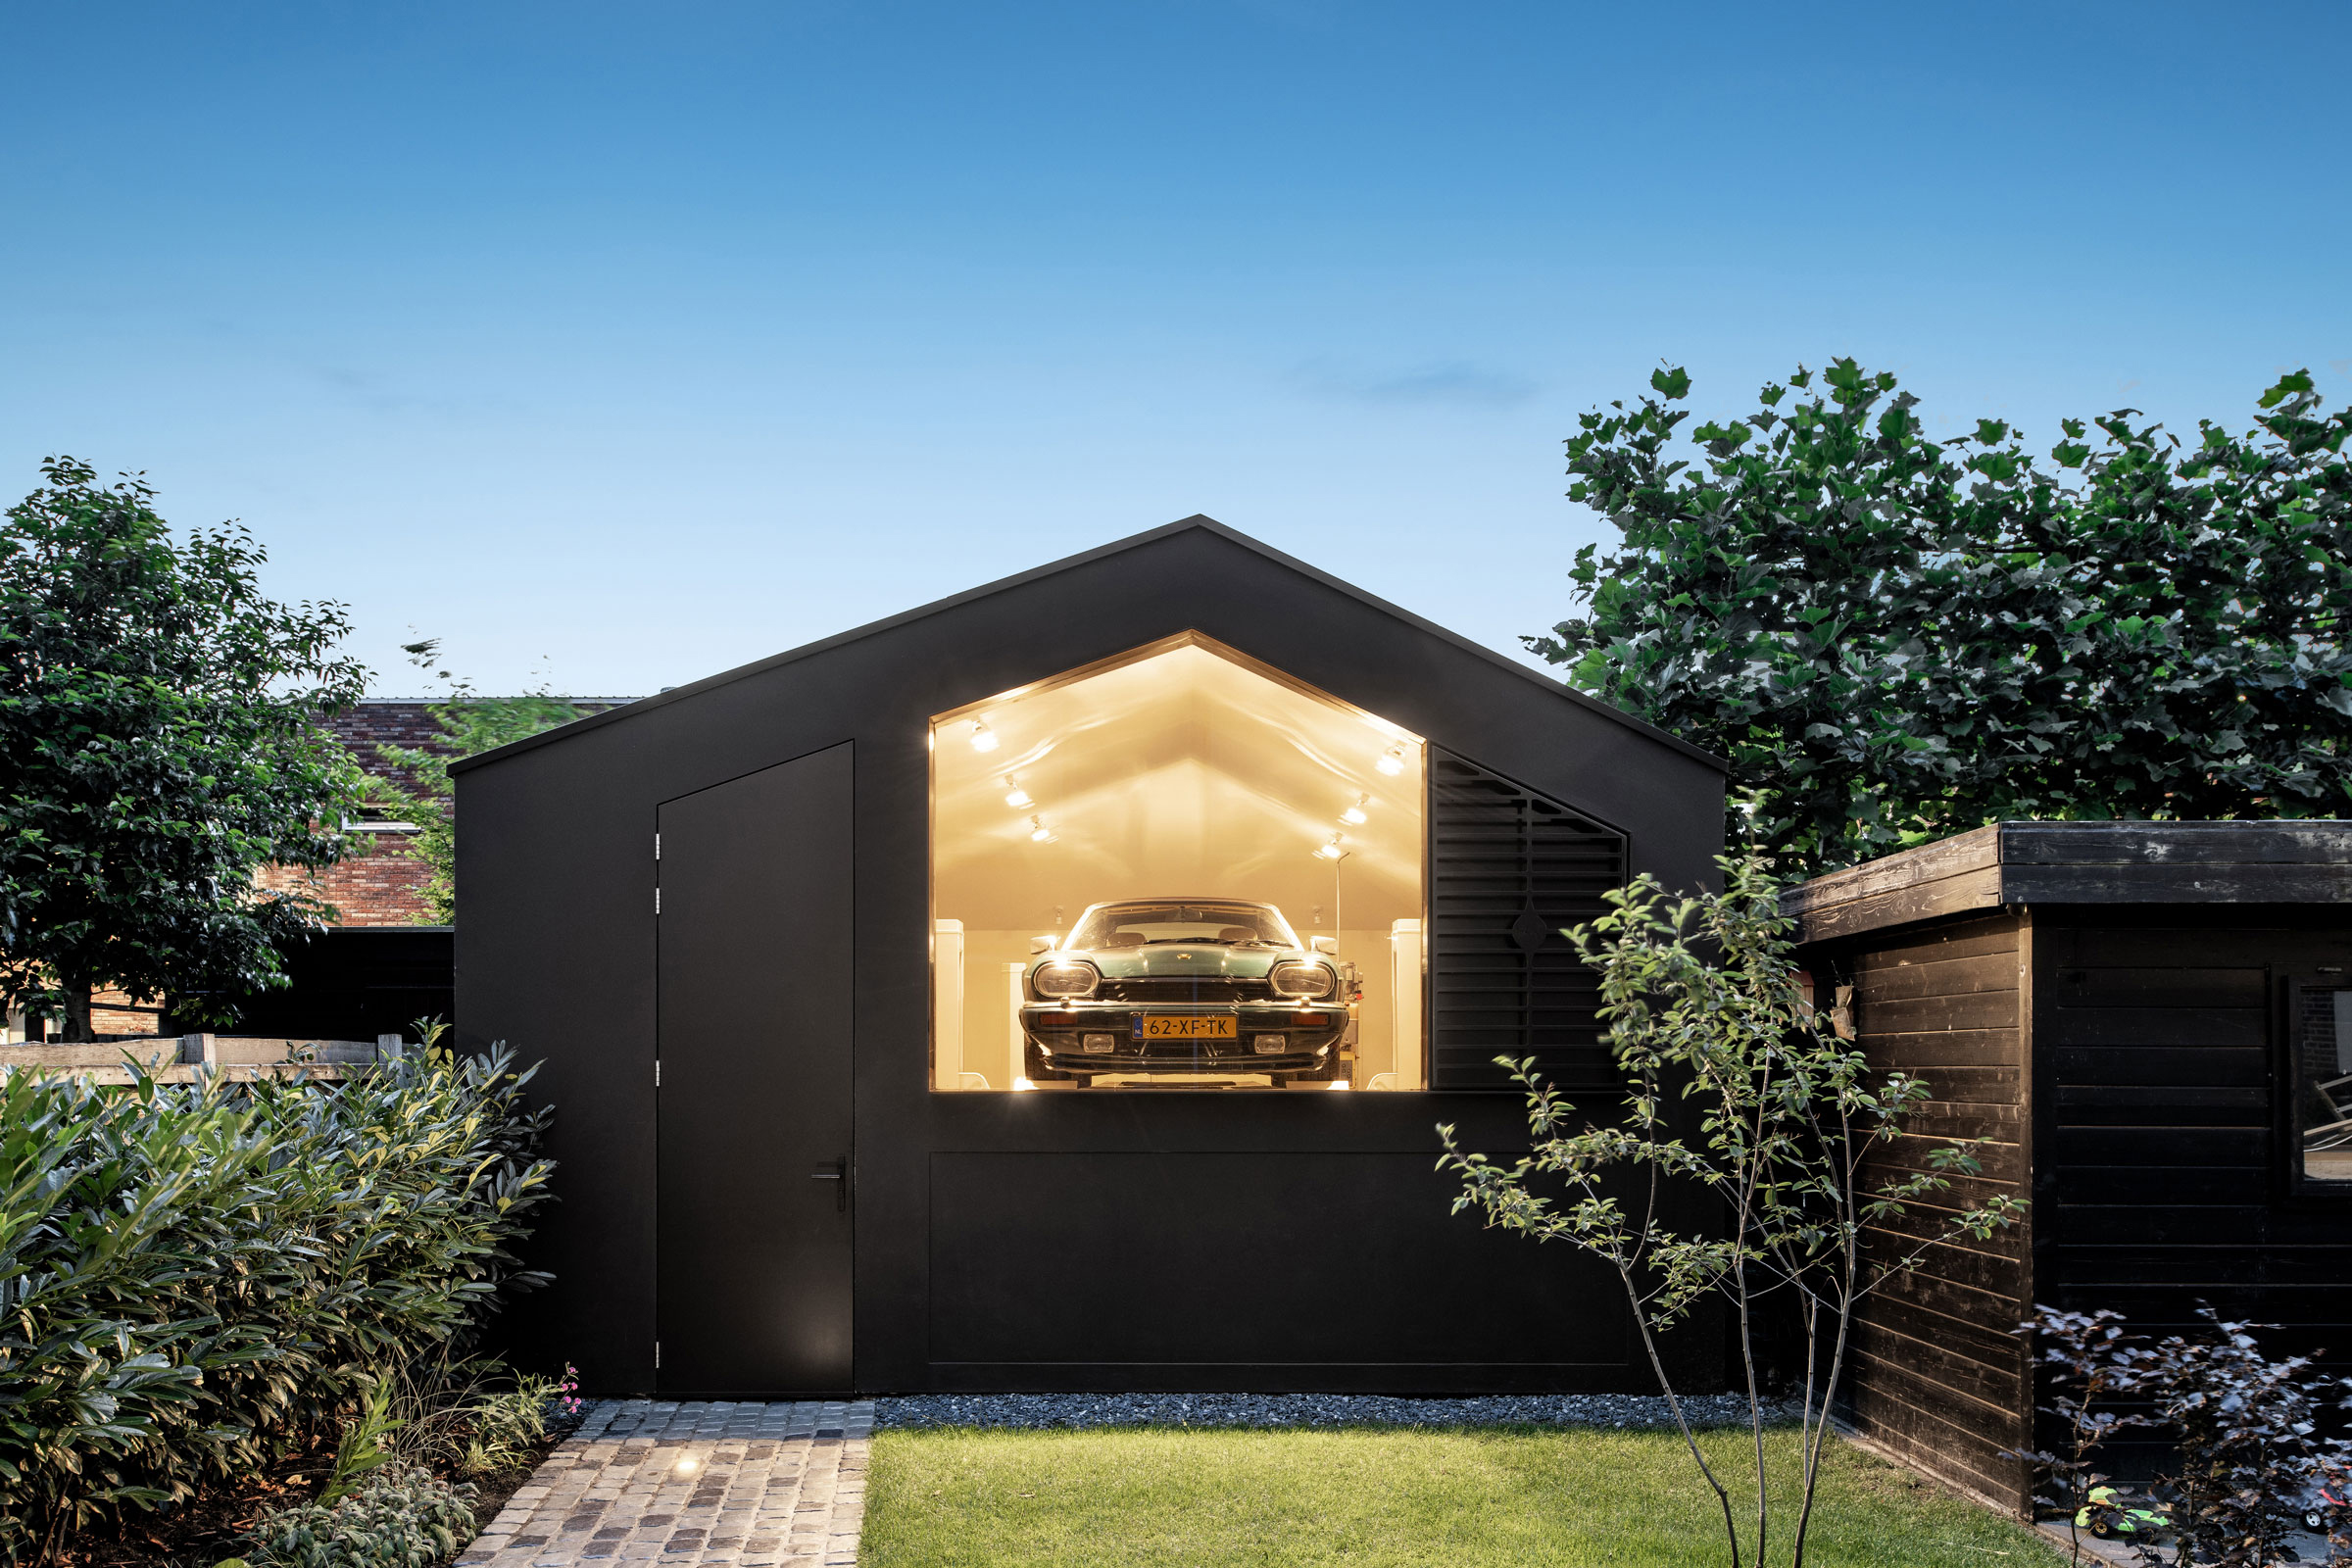 The Bureau Fraai Black Gems Project Gives Homeowners a Valuable View